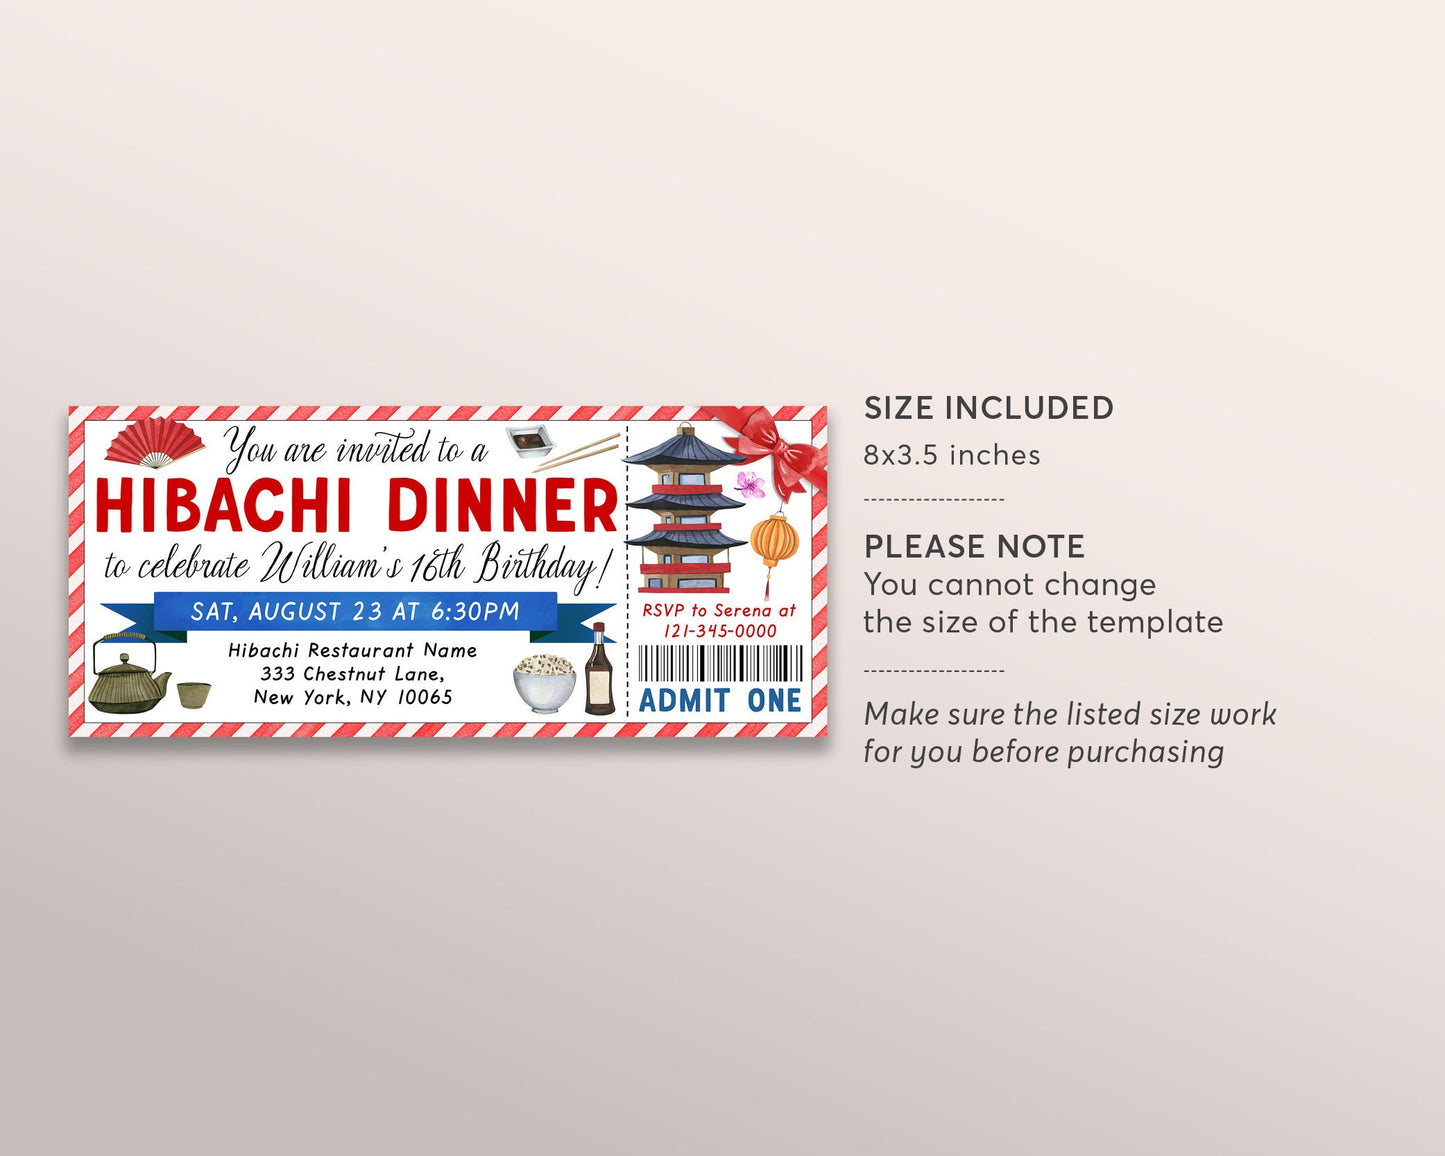 Hibachi Dinner Party Invitation Ticket Editable Template, Birthday Japanese BBQ Restaurant Dinner Invite For Kids And Adults Voucher DIY